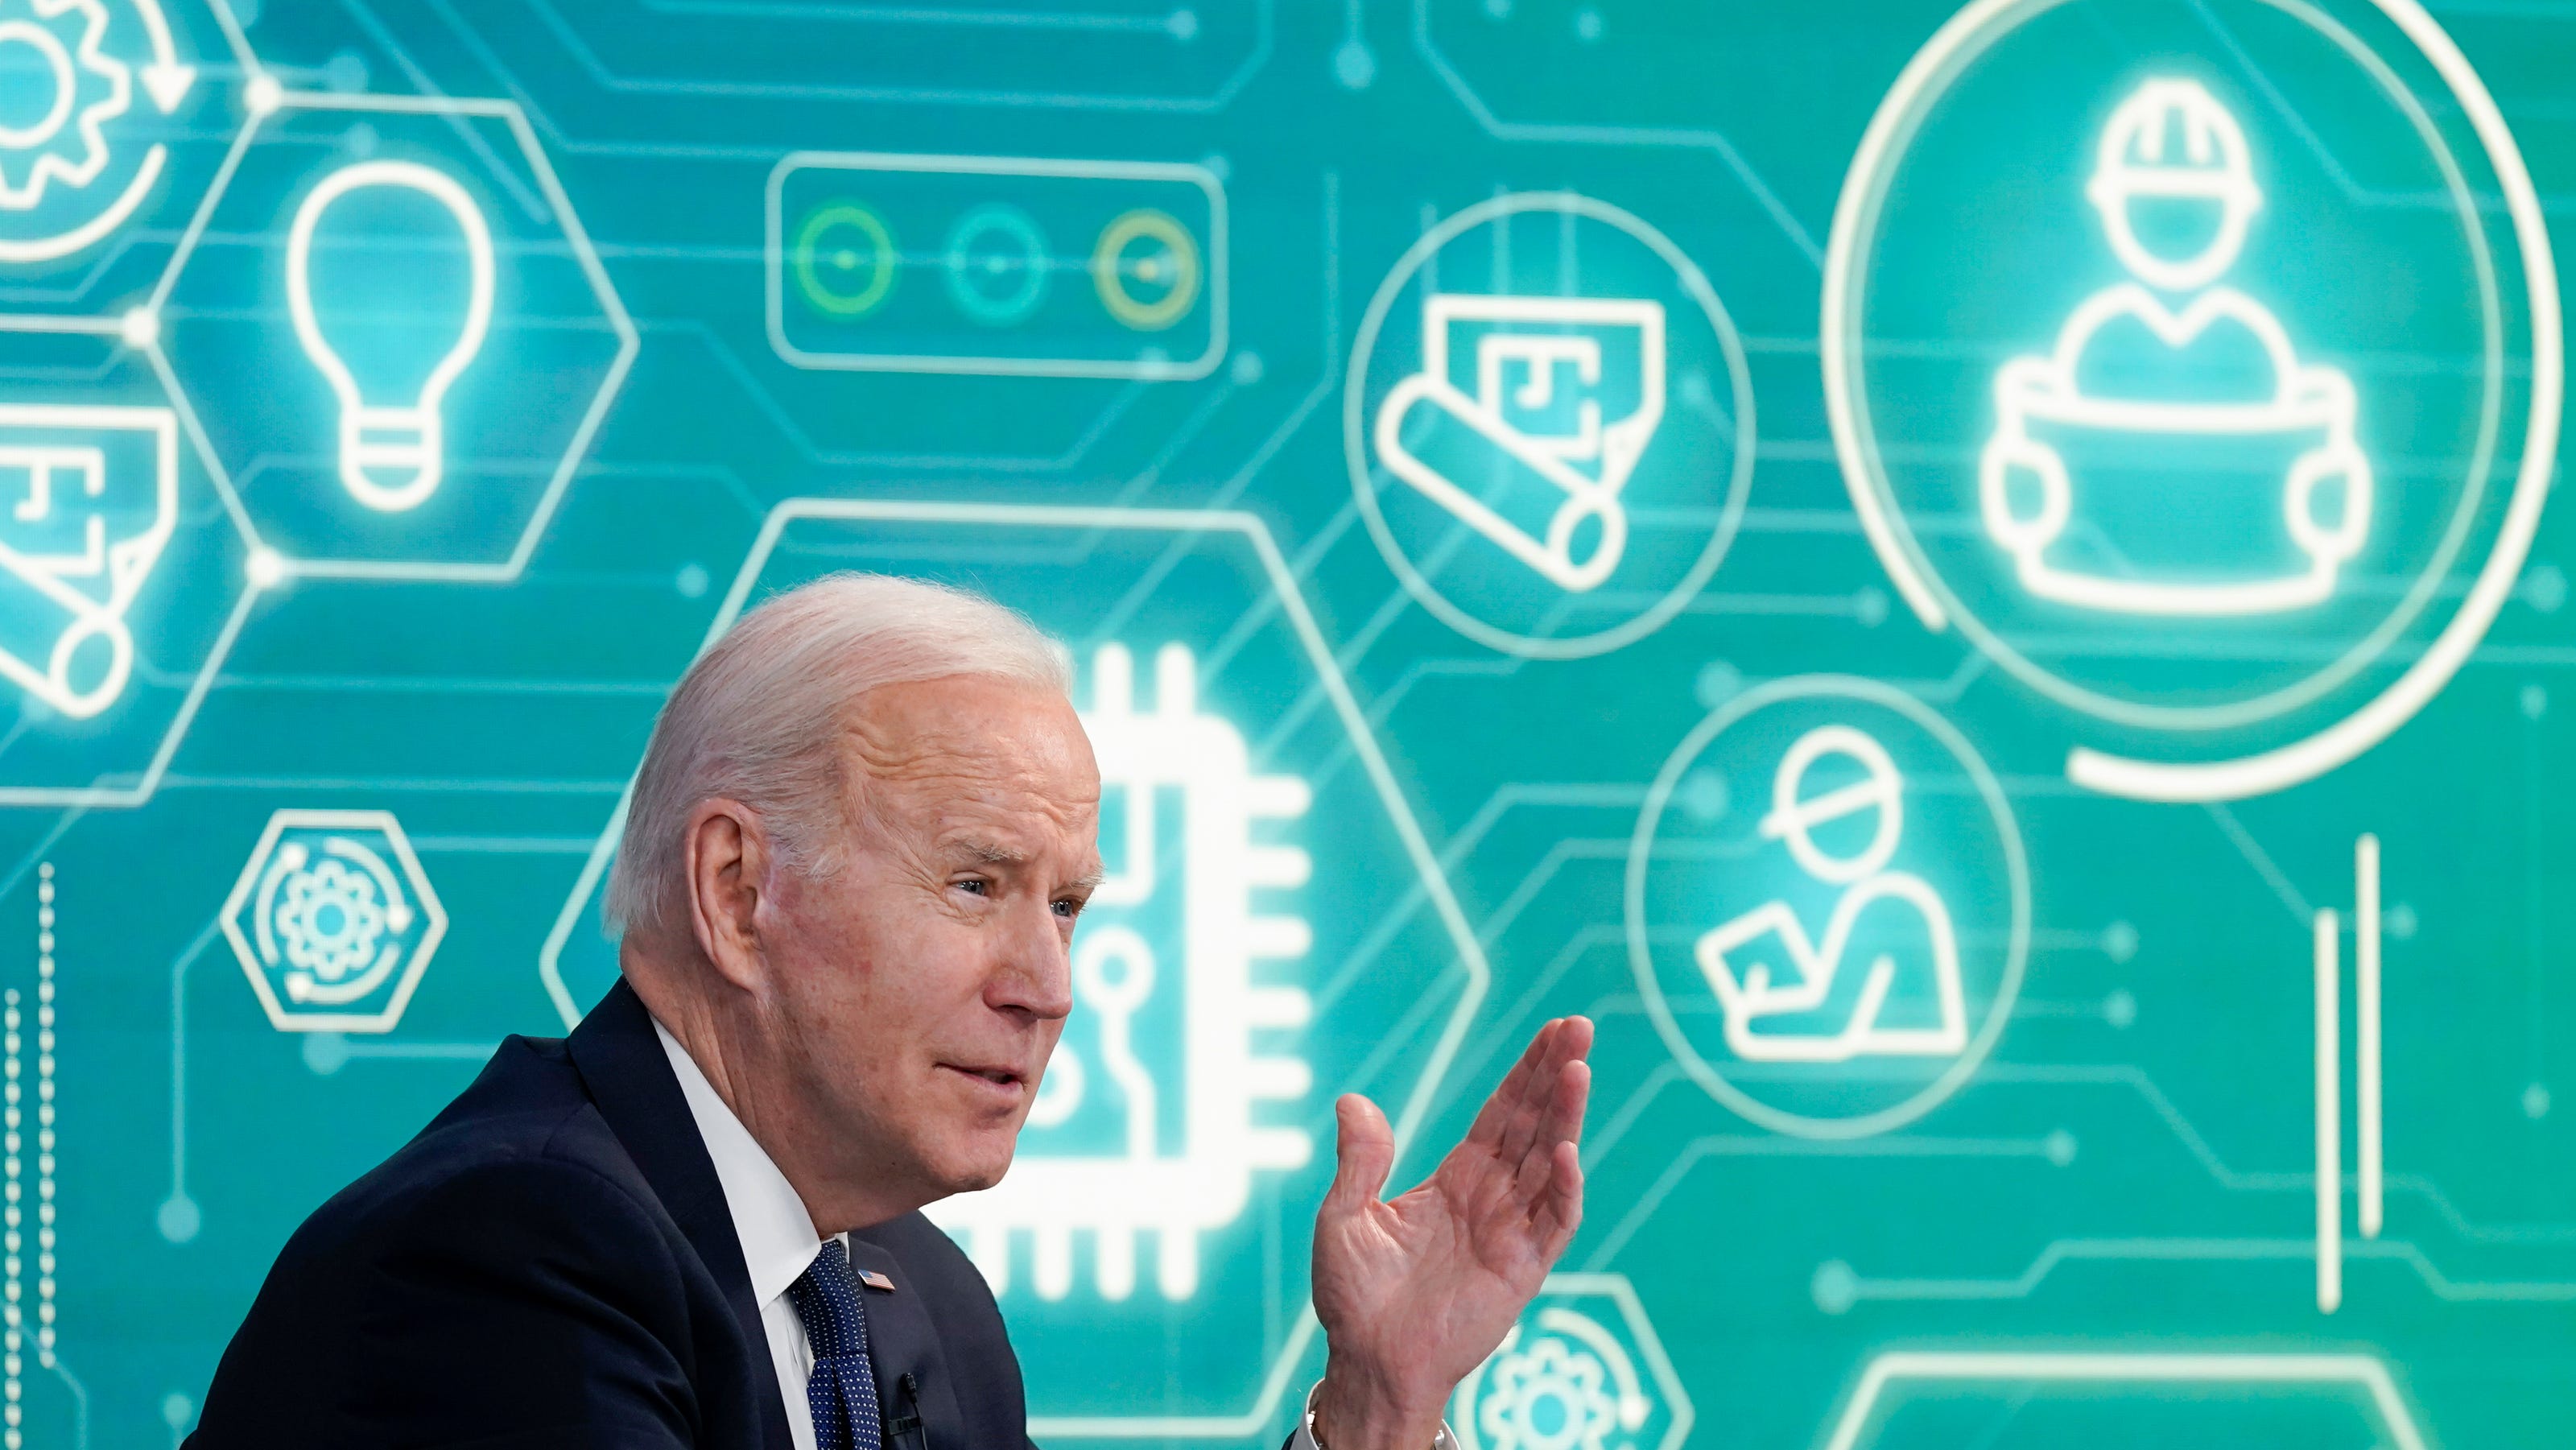 Biden's new cybersecurity strategy shifts the burden from people to Big Tech